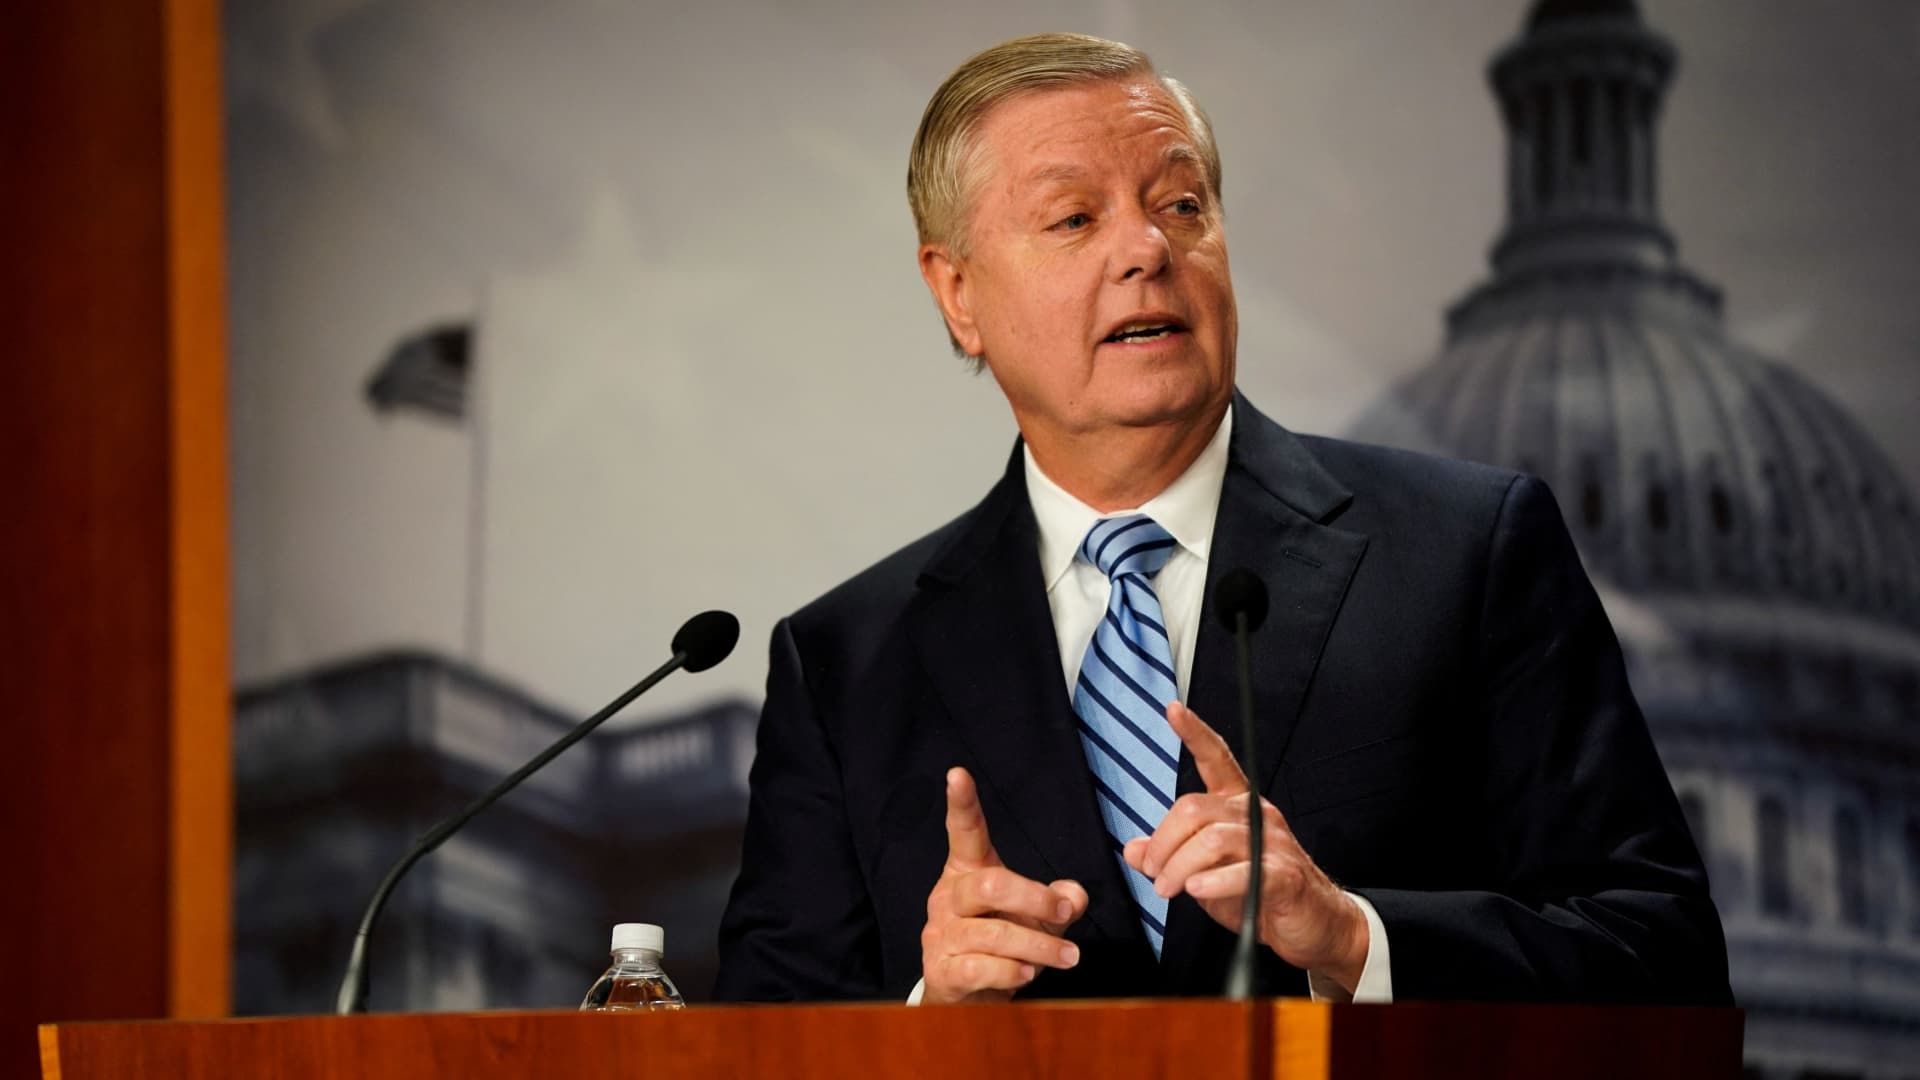 U.S. Senator Lindsey Graham (R-SC) talks about the cost of the Build Back Better package at the U.S. Capitol in Washington, December 16, 2021.